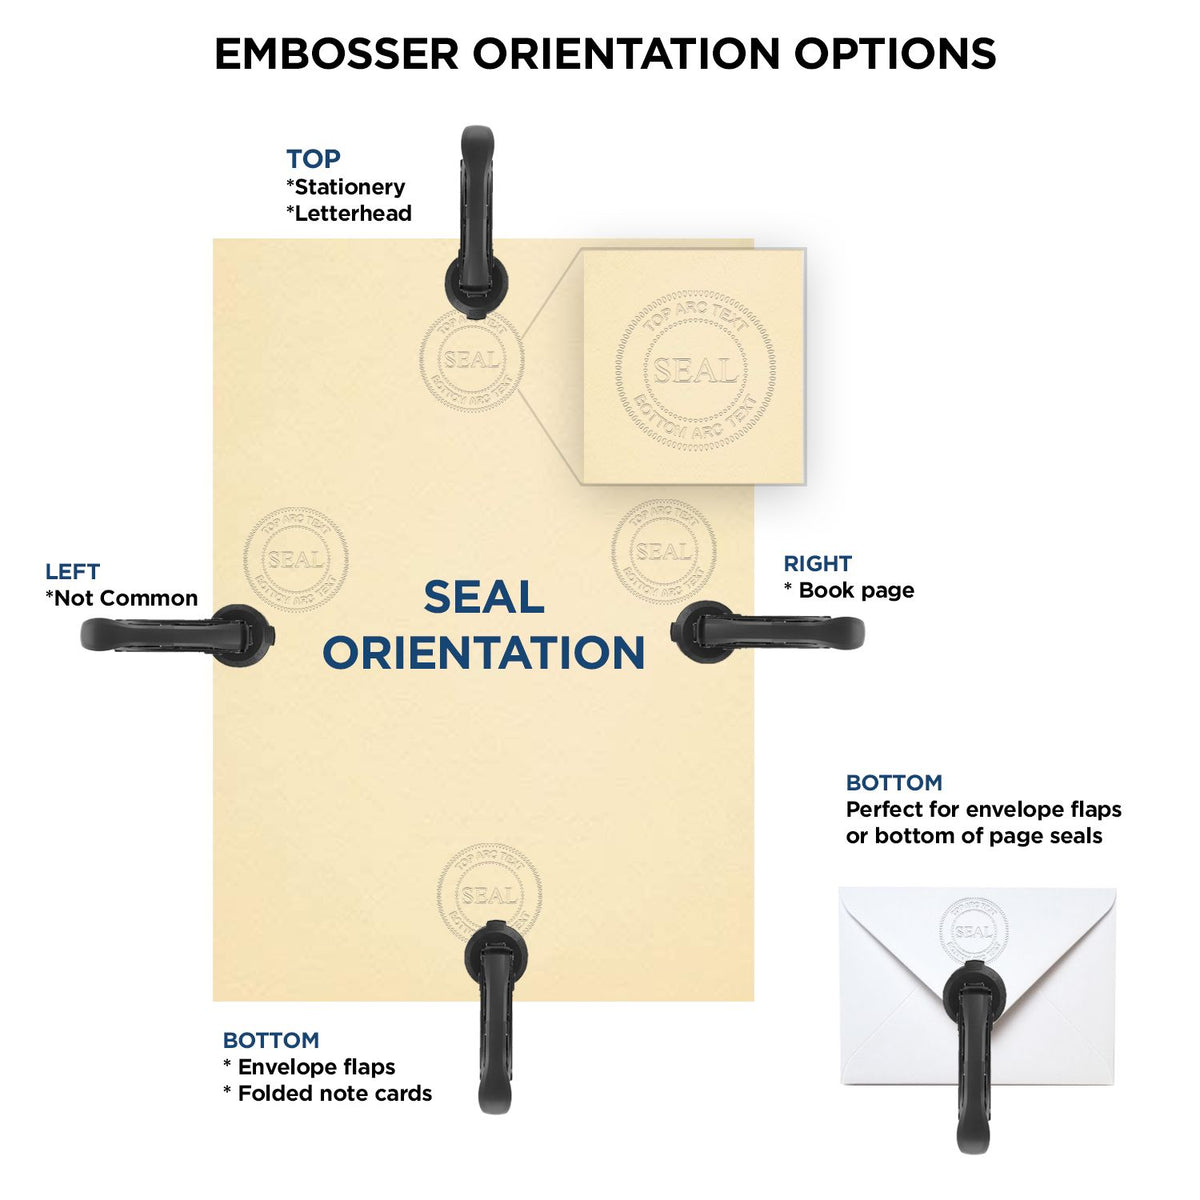 An infographic for the Long Reach Kansas Land Surveyor Seal showing embosser orientation, this is showing examples of a top, bottom, right and left insert.